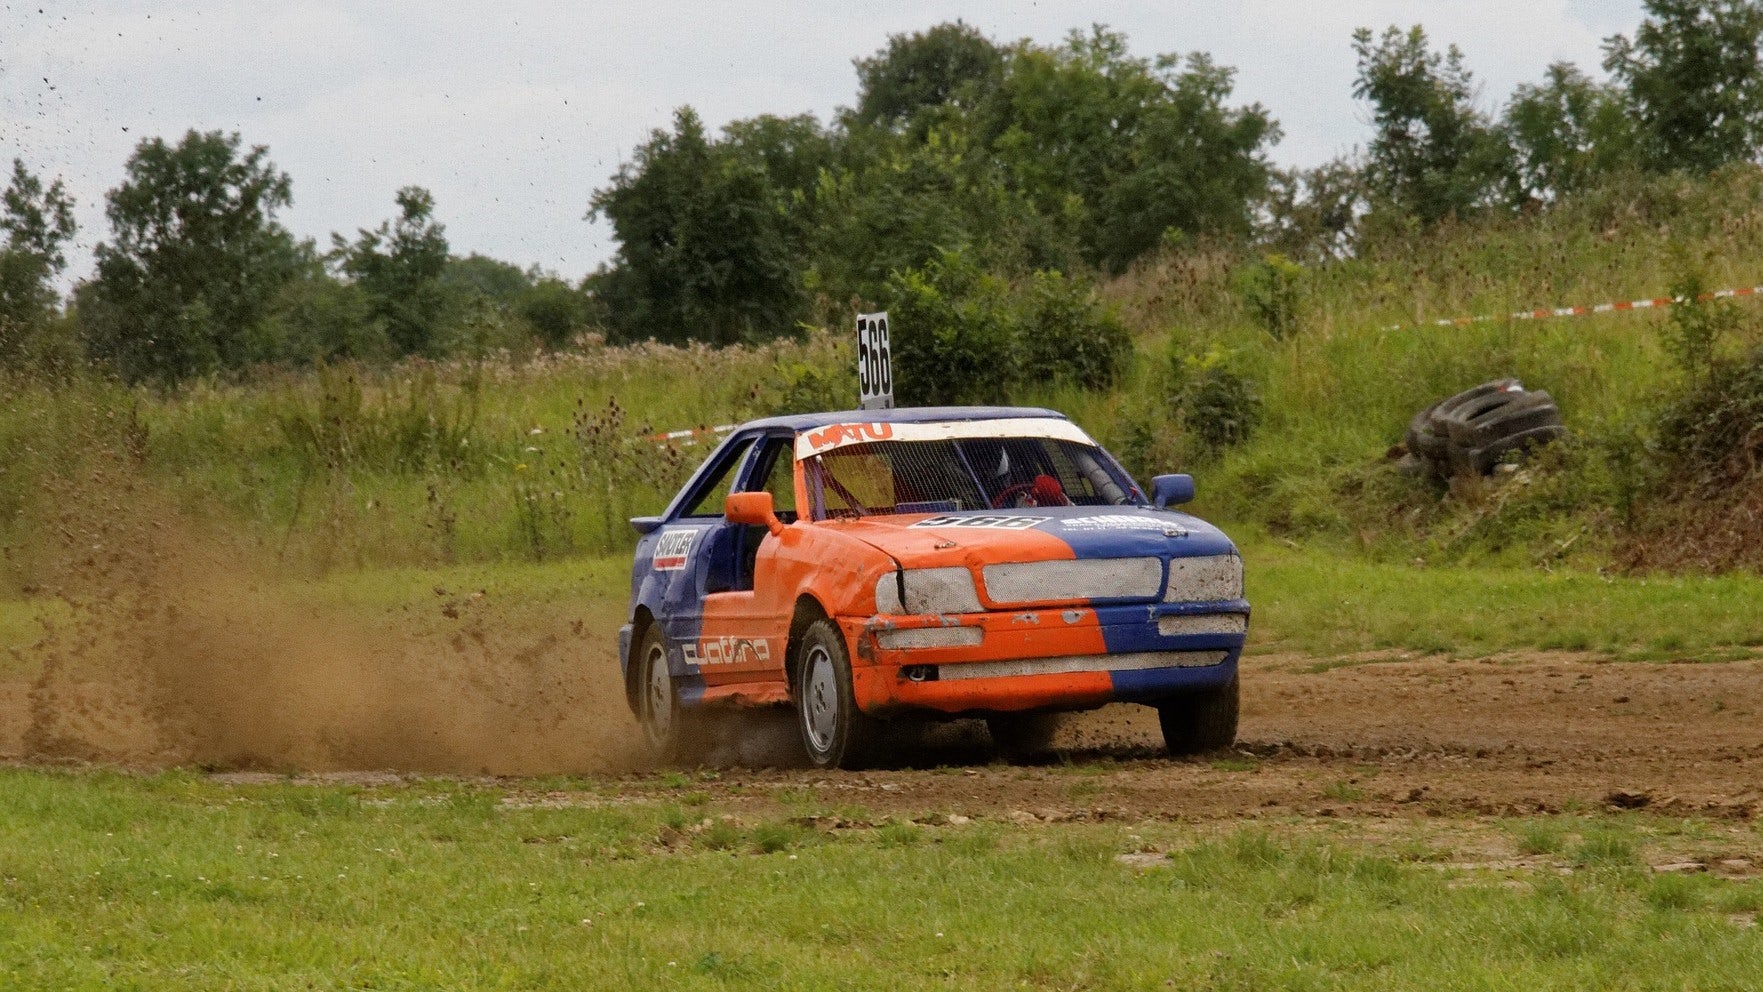 A car on off-road surface